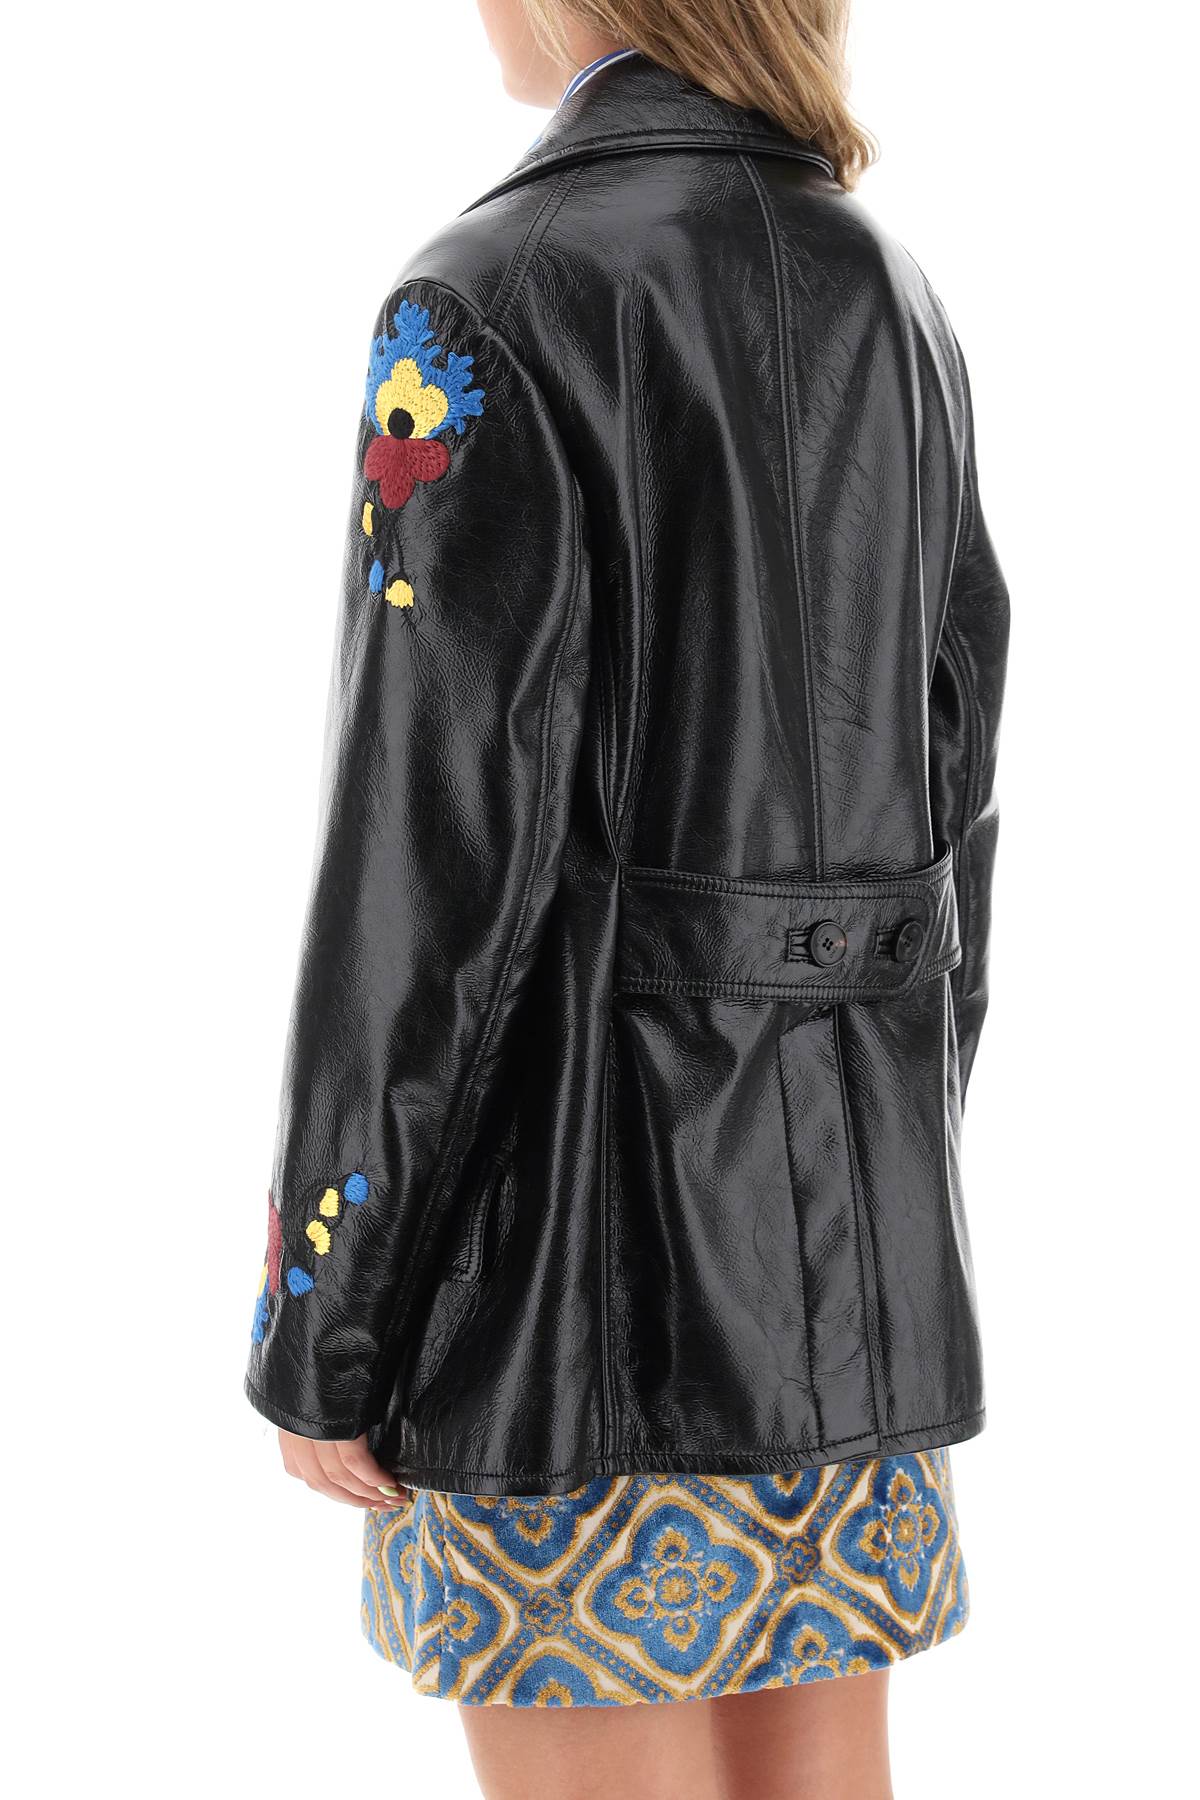 Etro jacket in patent faux leather with floral embroideries-2